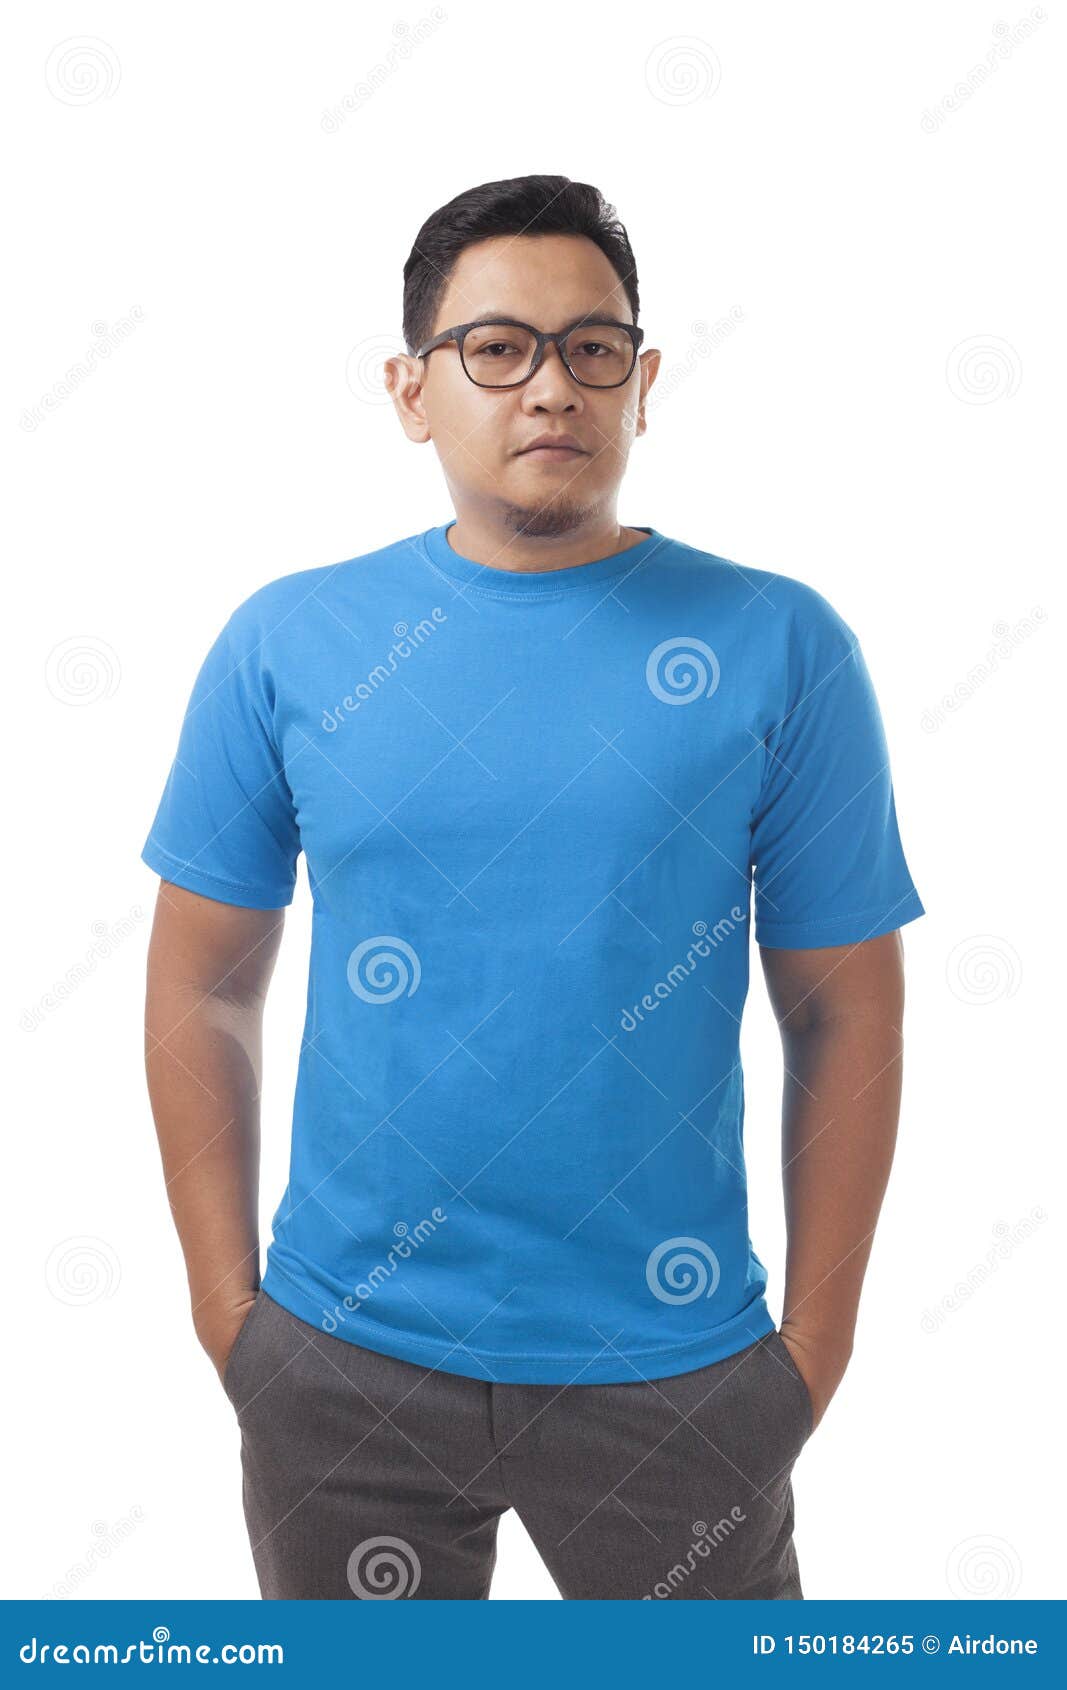 Blue Shirt Design Template stock image. Image of empty - 150184265